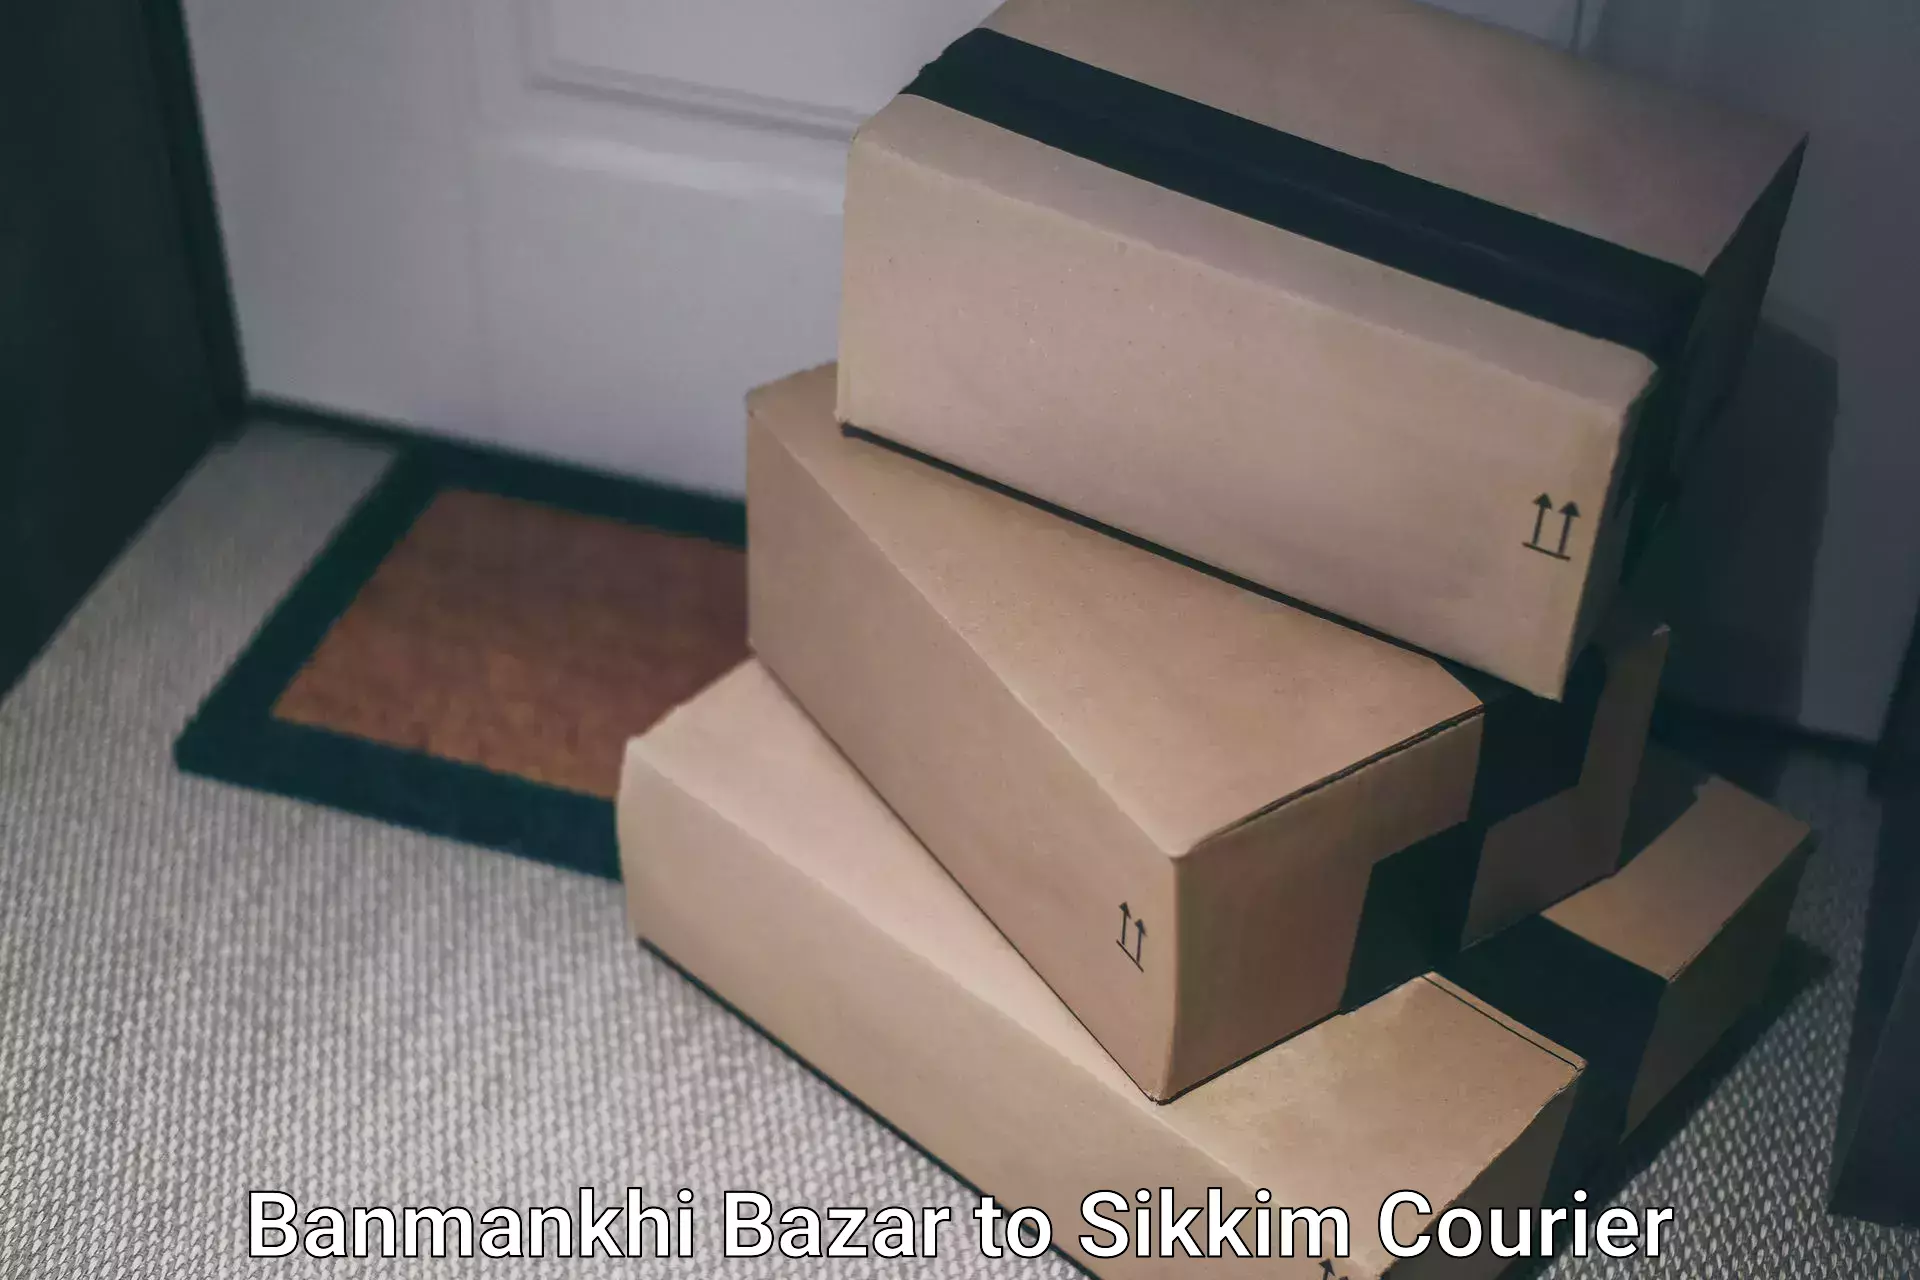 Fast shipping solutions Banmankhi Bazar to Sikkim